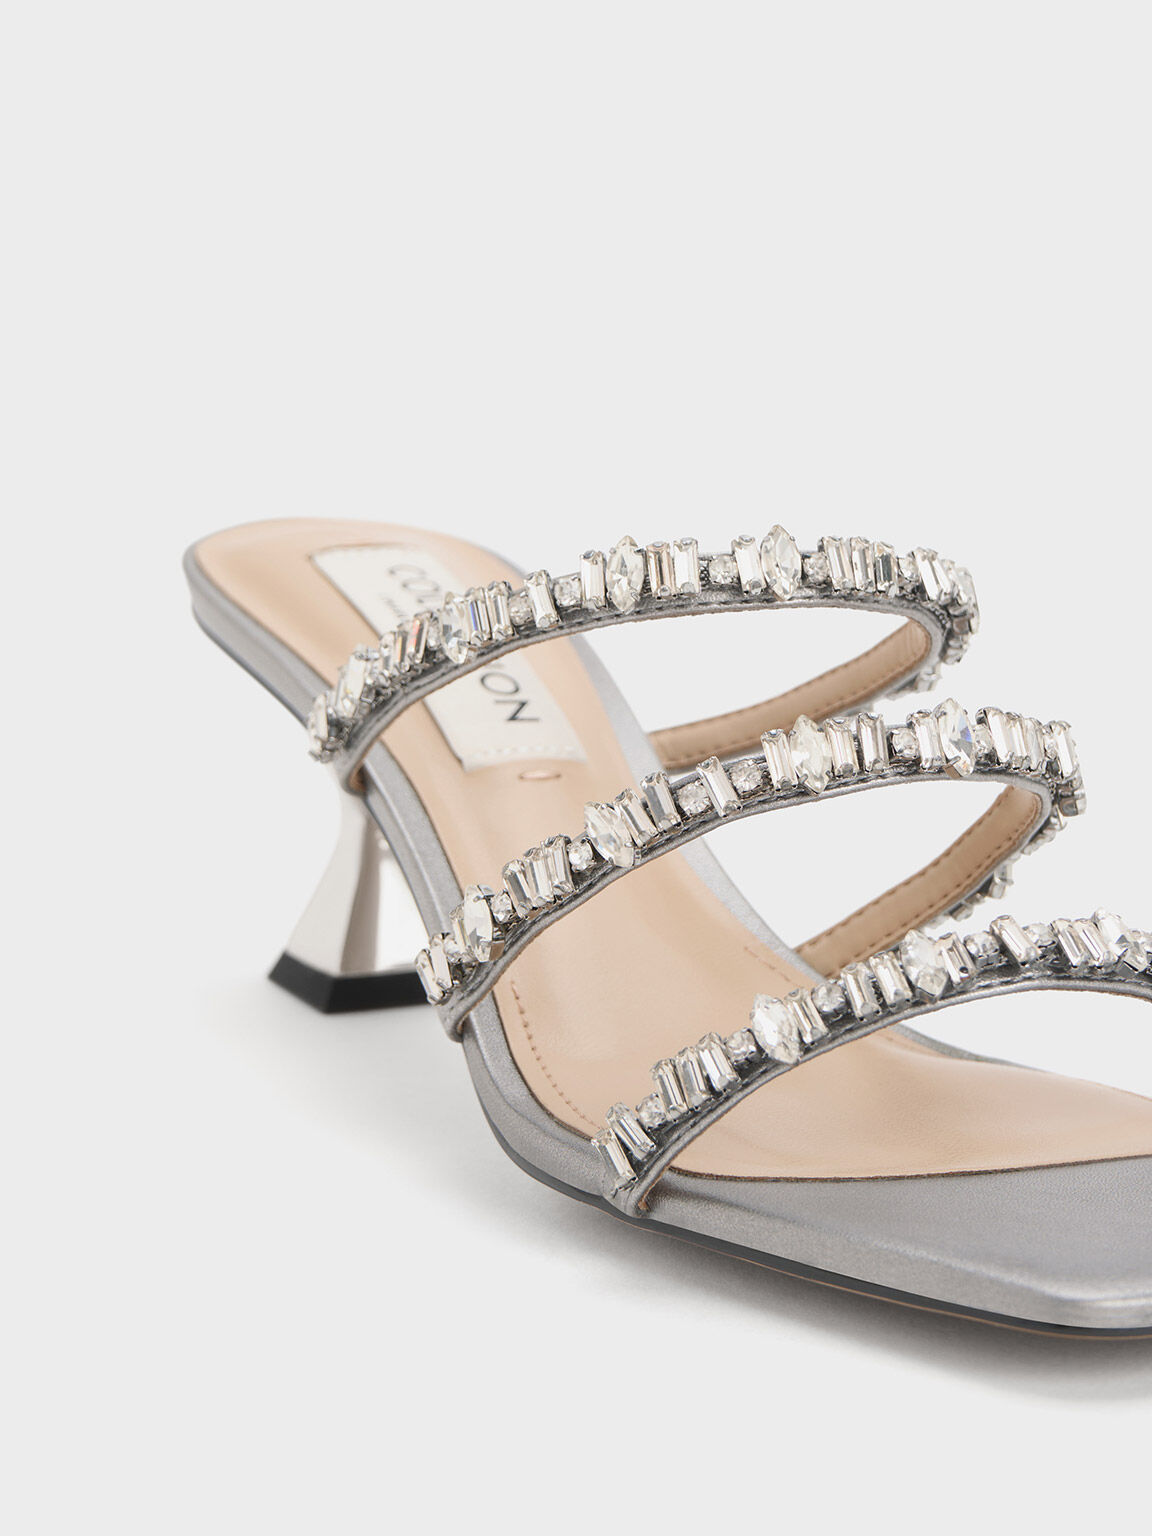 Wedding Collection: Gem-Encrusted Metallic Strappy Sandals, Silver, hi-res